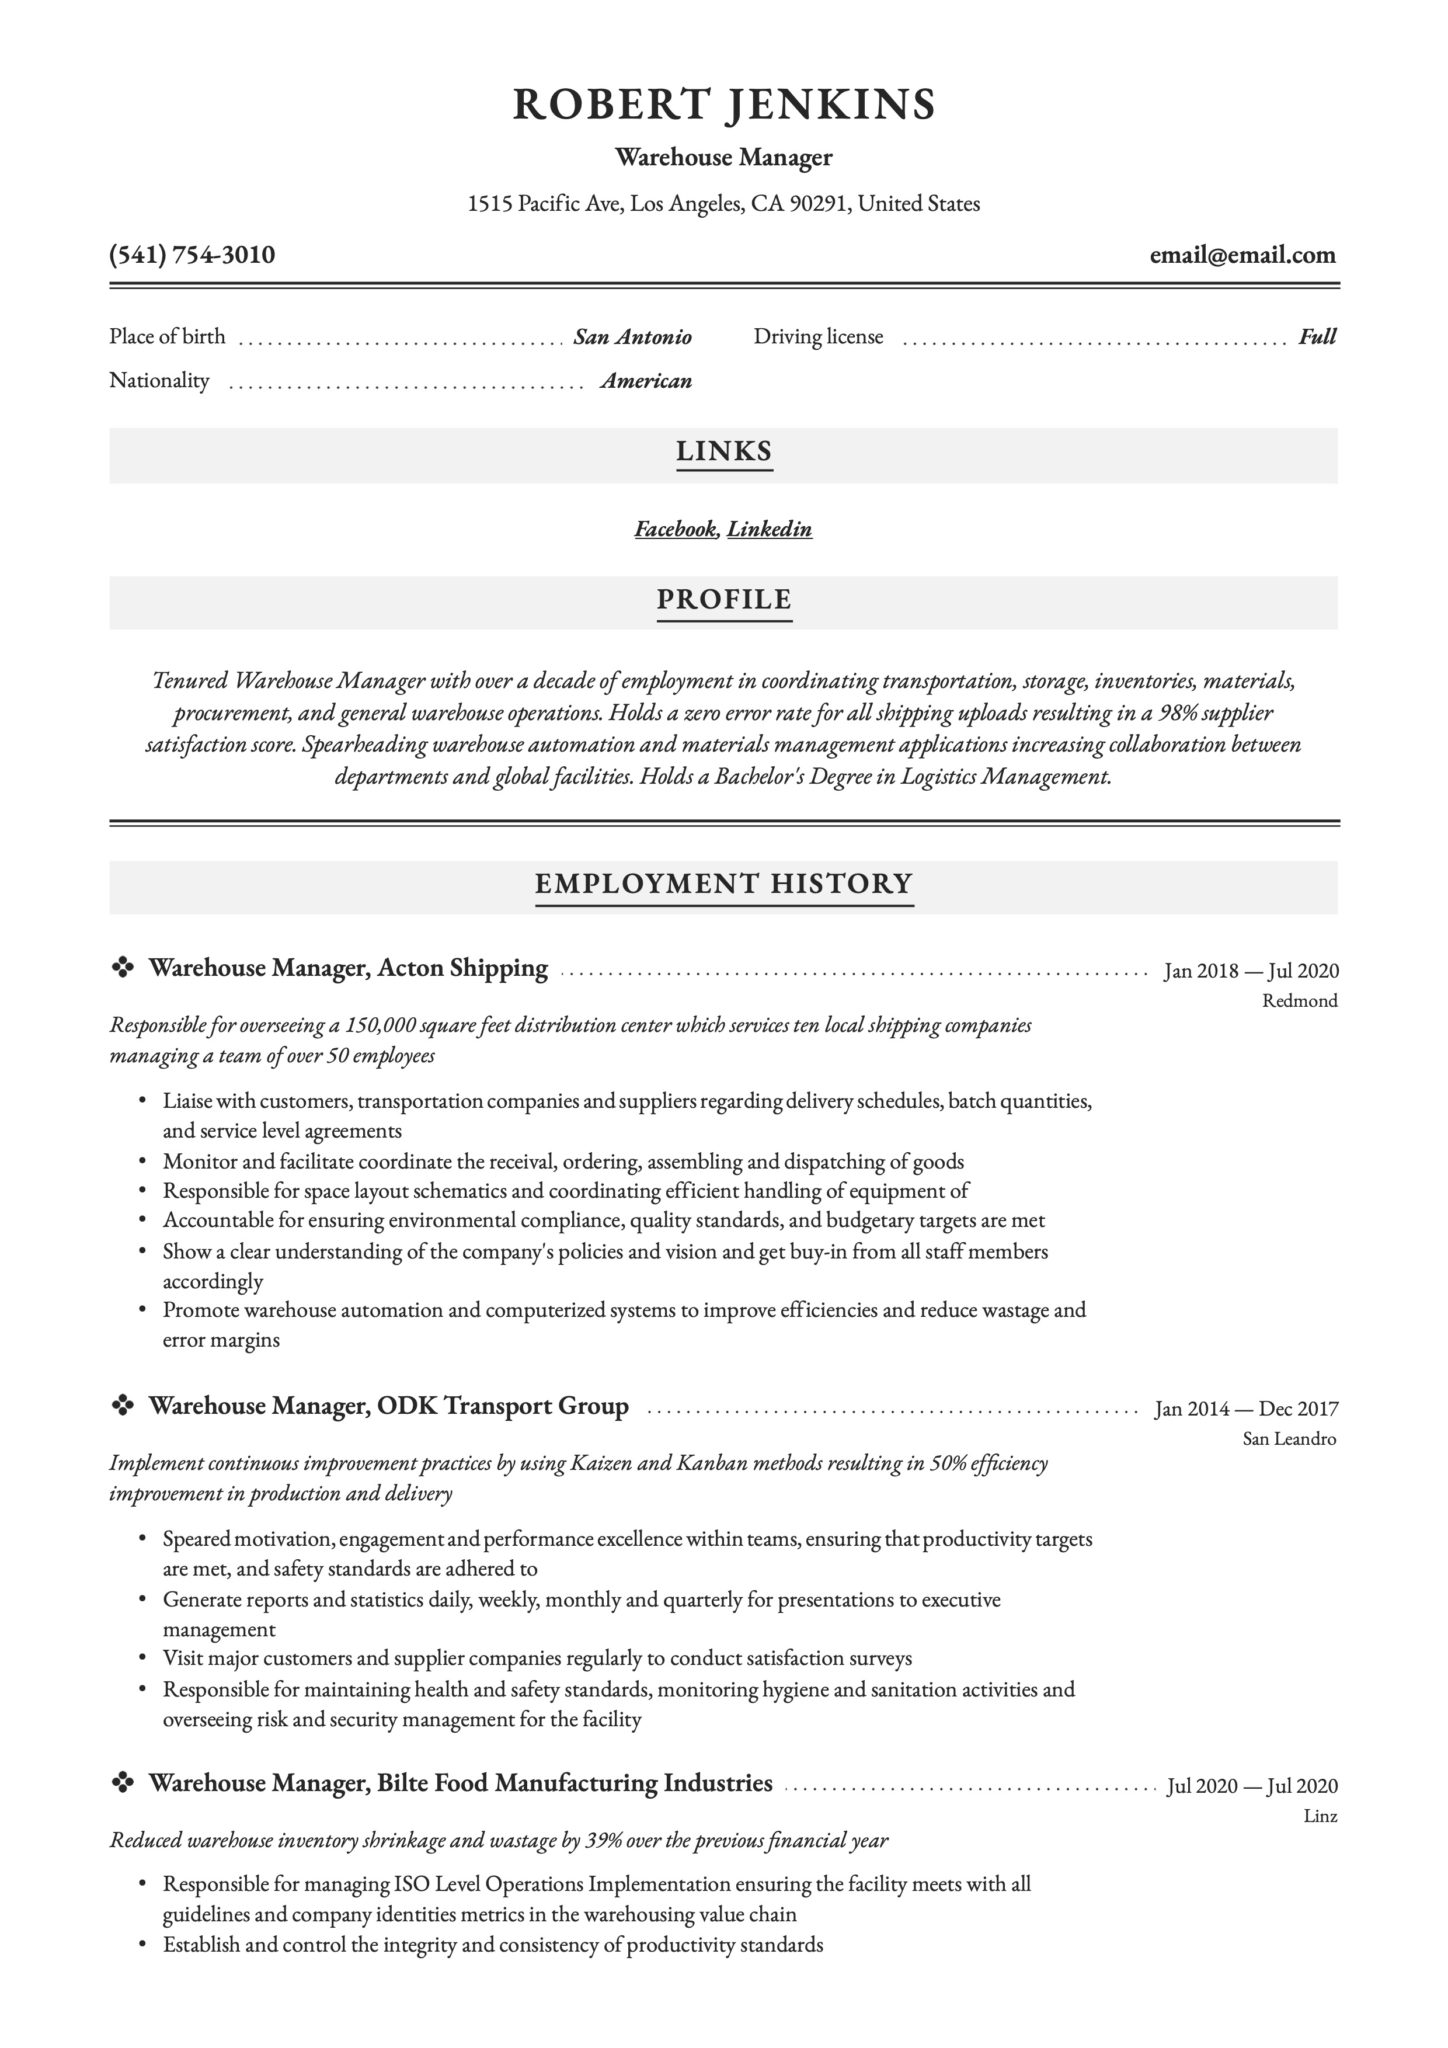 Professional Resume Example Warehouse Manager